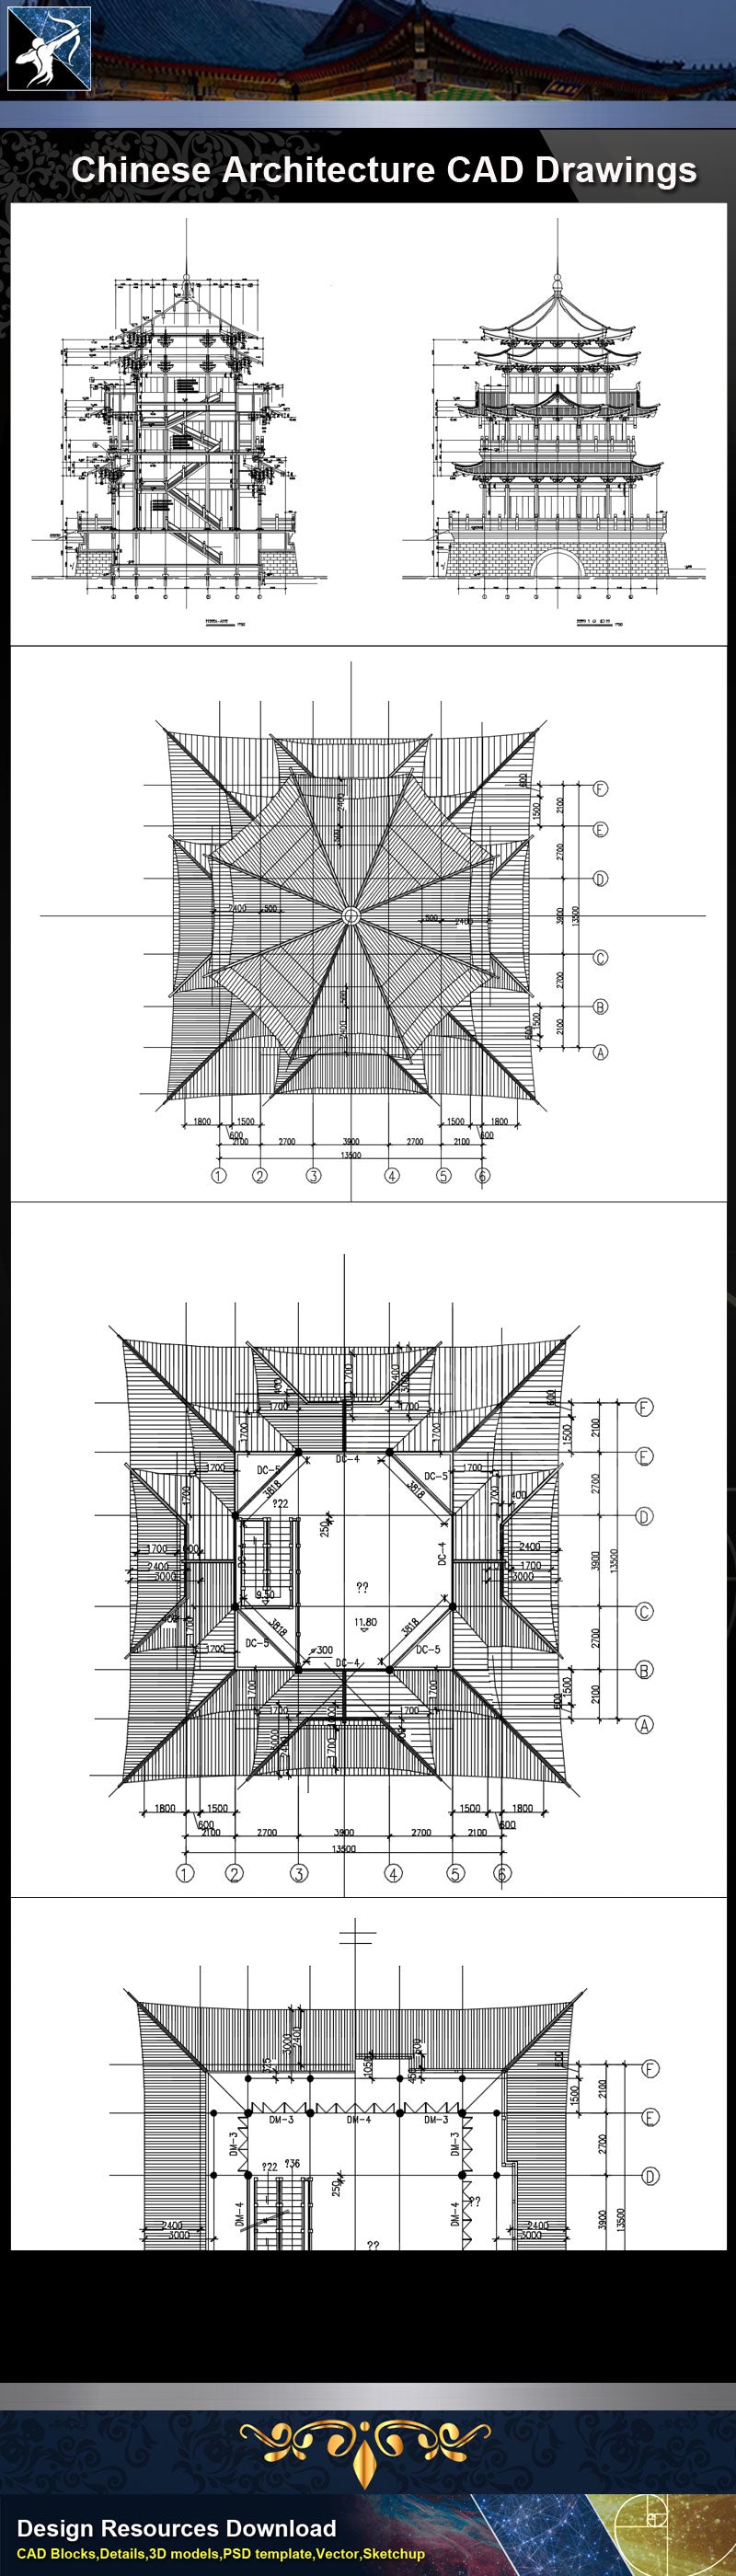 ★Chinese Architecture CAD Drawings-Chinese Tower 2